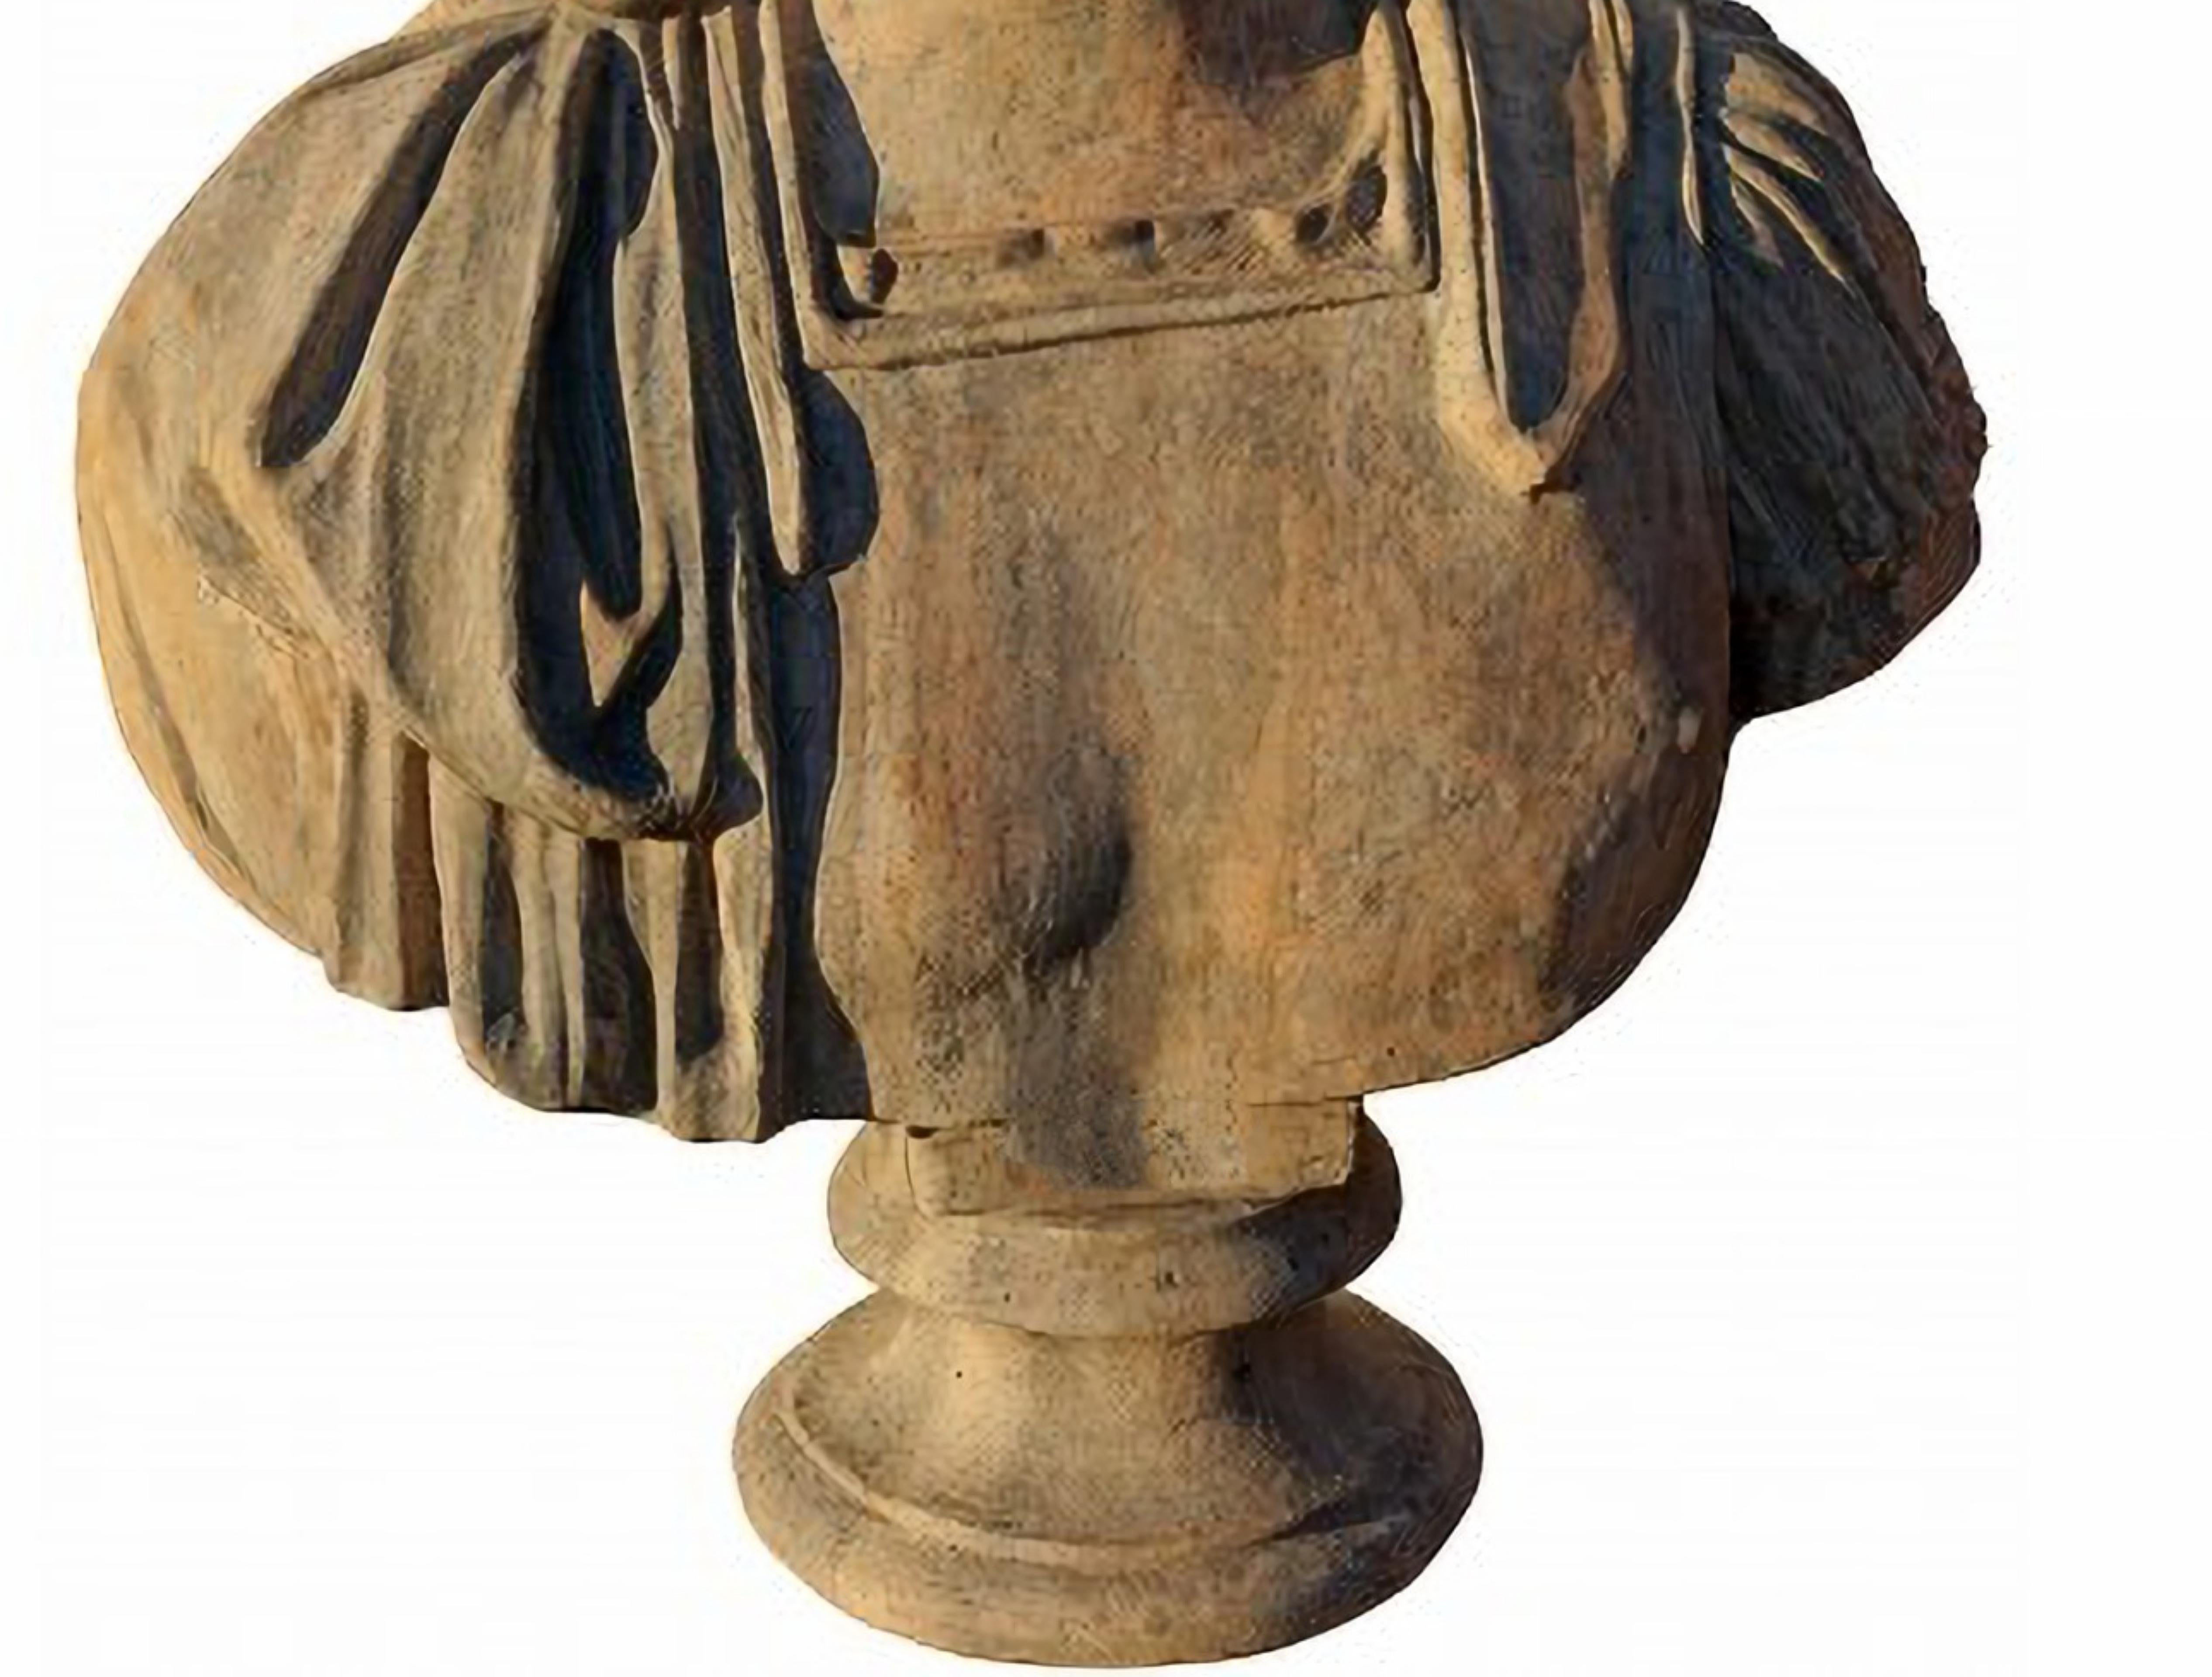 CICERONE, MARCO TULLIO TERRACOTTA BUST late 20th Century

(Arpino 106 BC - Formia 43 BC
Latin orator, politician and writer.
Patinated terracotta, copy of a bust from the Capitoline Museums.

HEIGHT 77 cm
WIDTH 60 cm
DEPTH 30 cm
WEIGHT 15 Kg
ROUND